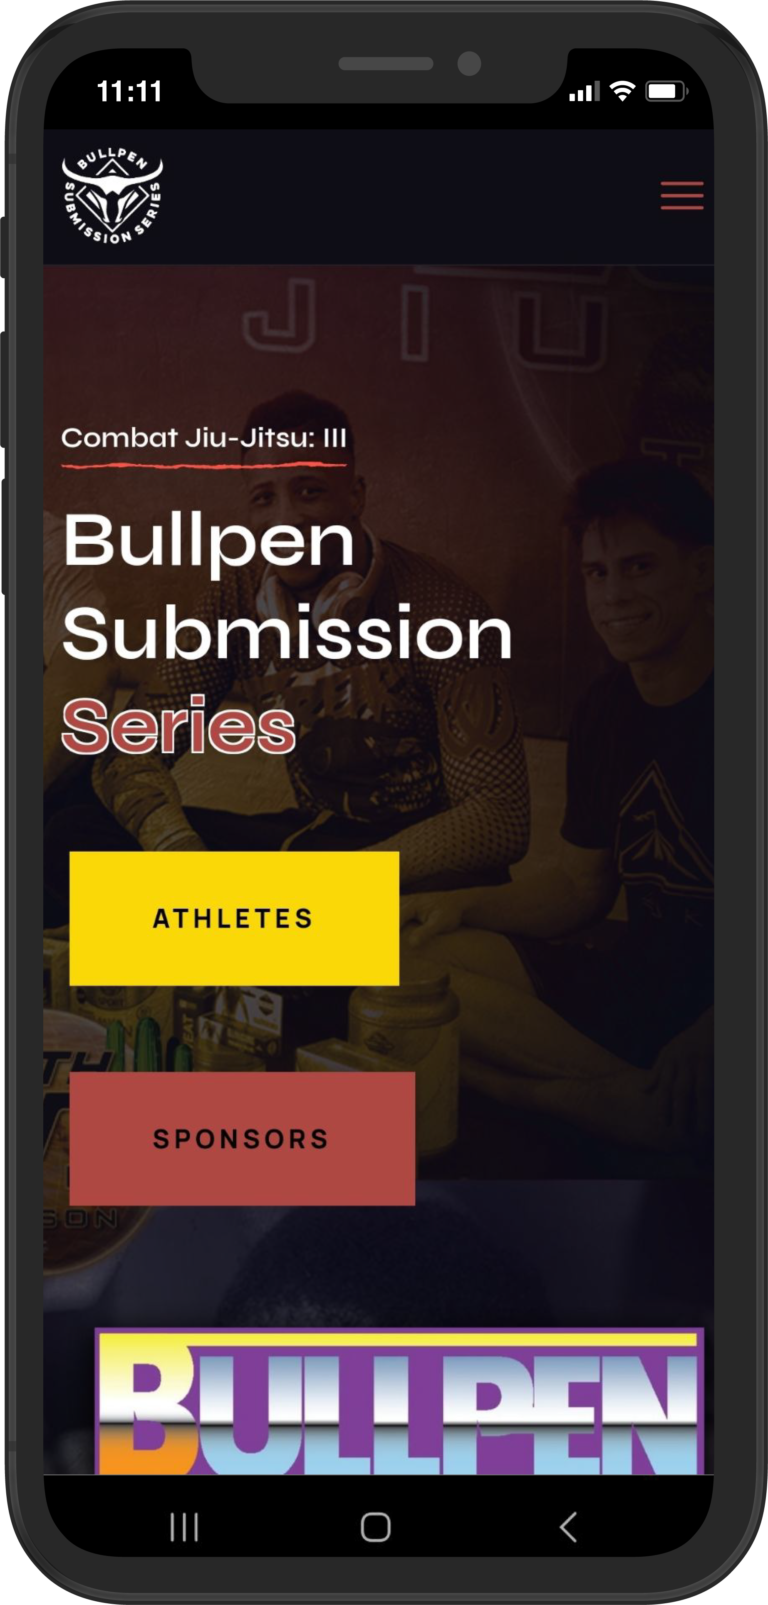 Bullpen-Submission-Series-Website